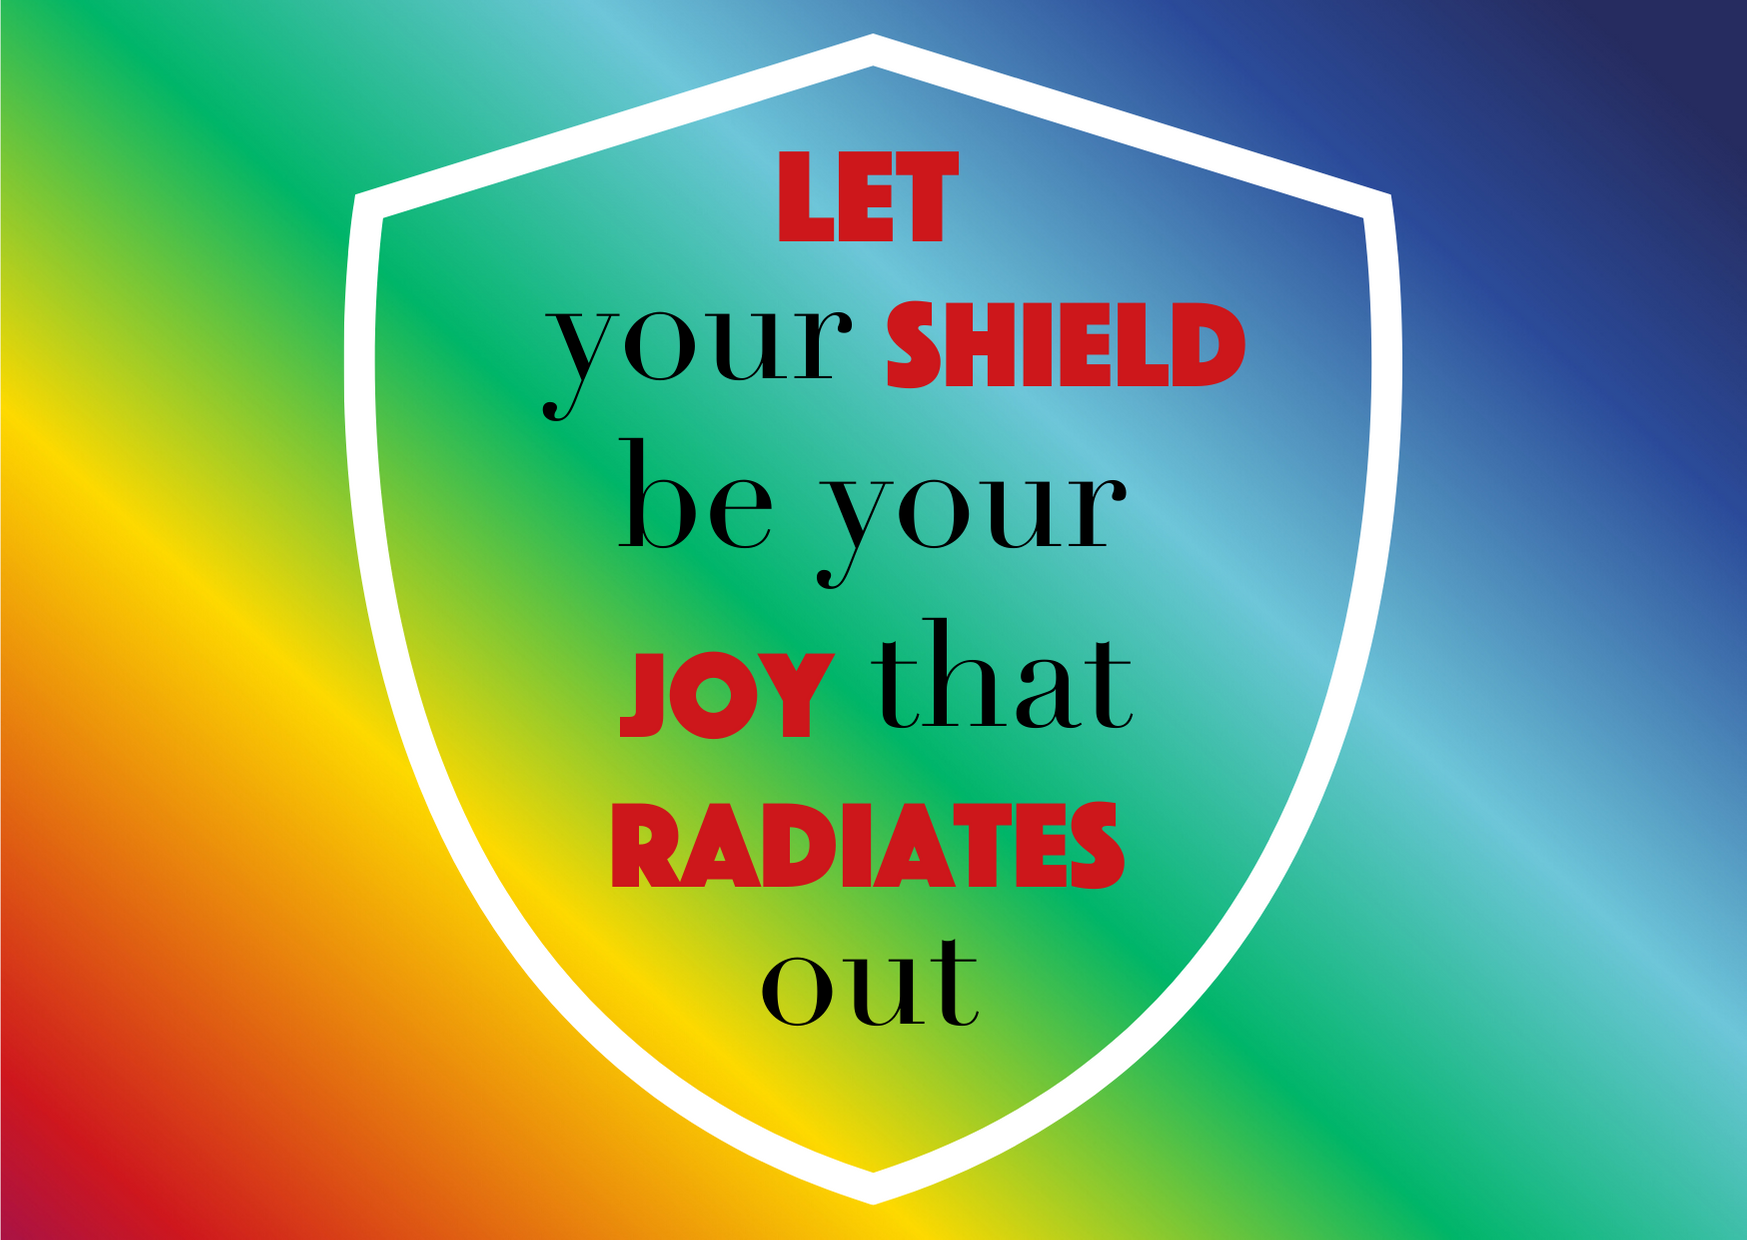 A multi-coloured background with the outline of a white shield and the words 'Let your shield be your joy that radiates out.' in text.